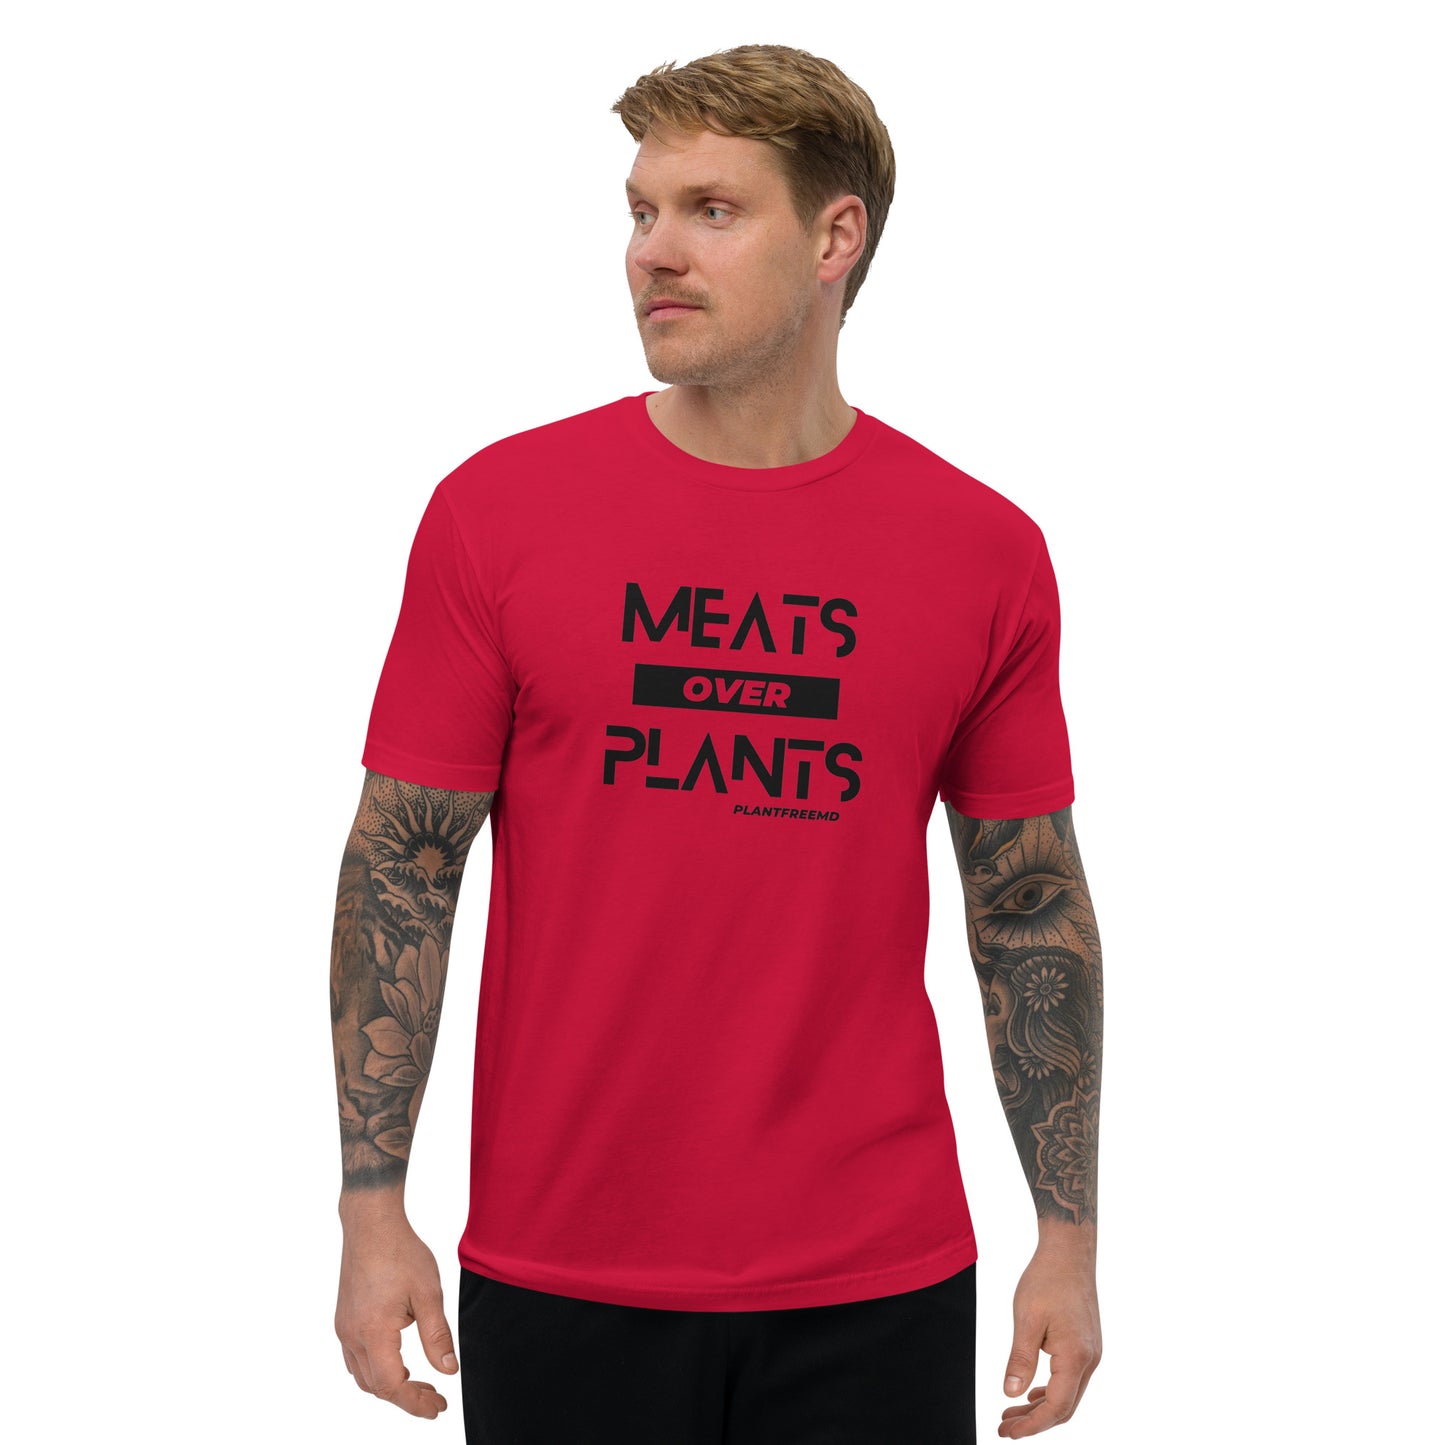 Meats Over Plants Men's Fitted T-shirt Dark